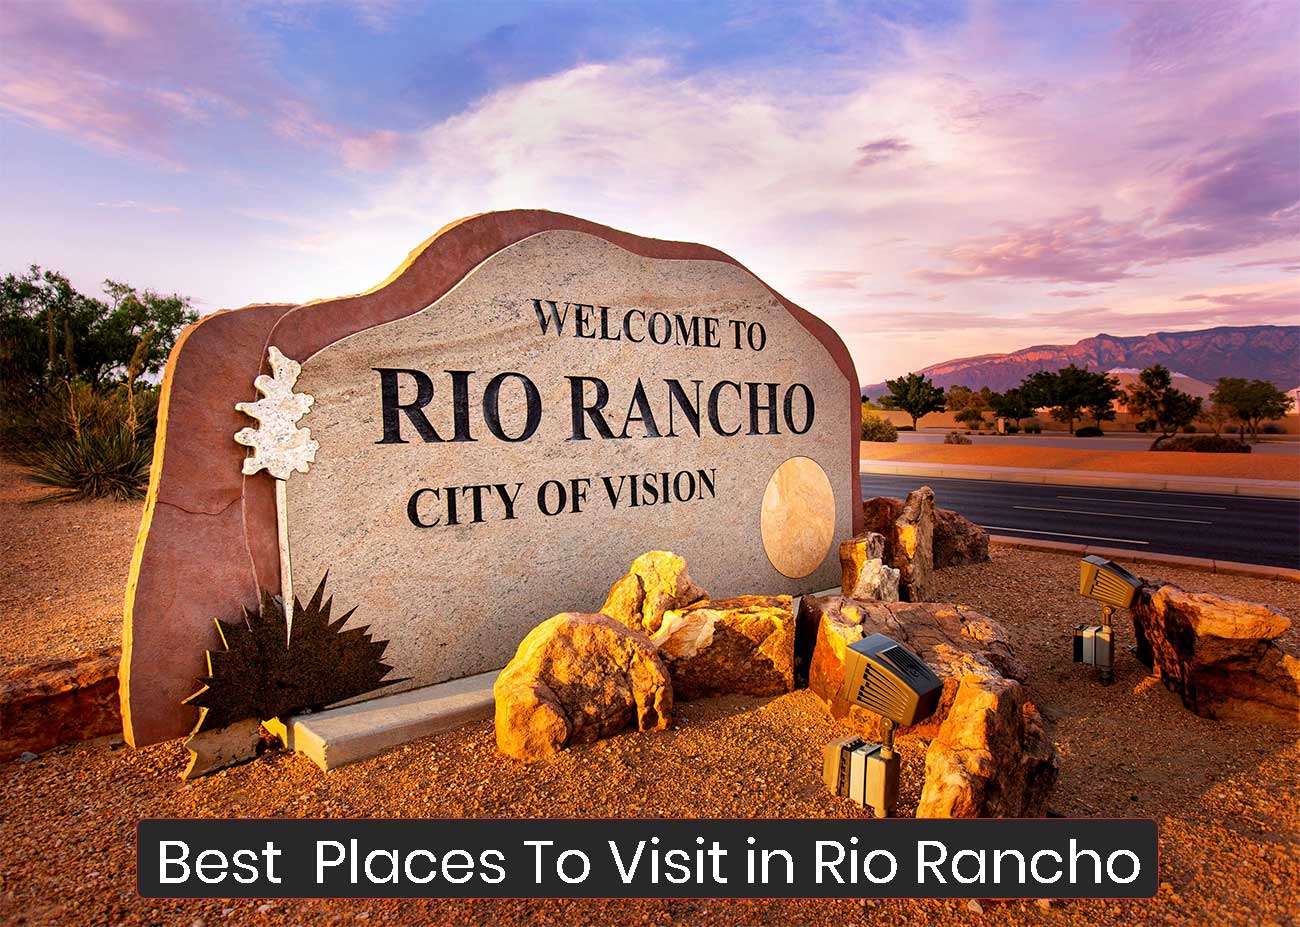 Best 9 Places To Visit In Rio Rancho